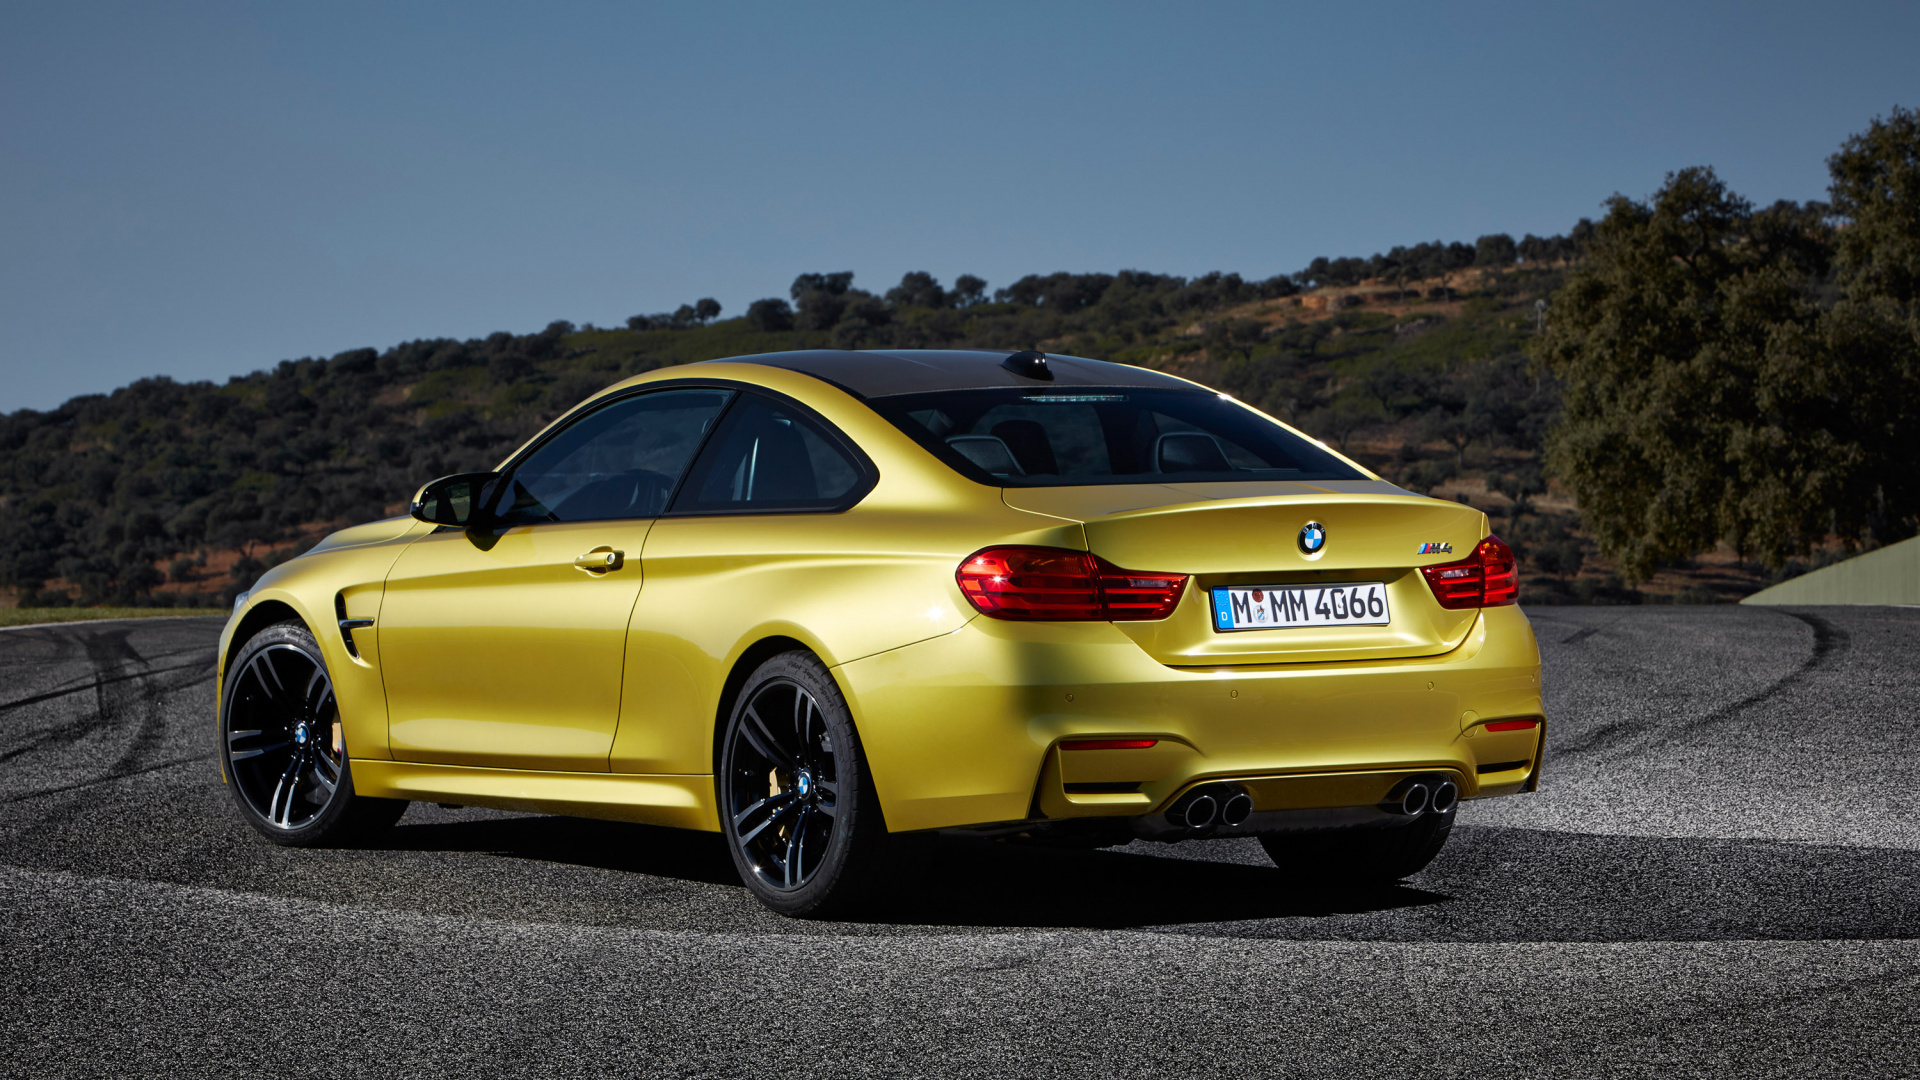 Yellow Bmw m 3 on Road During Daytime. Wallpaper in 1920x1080 Resolution